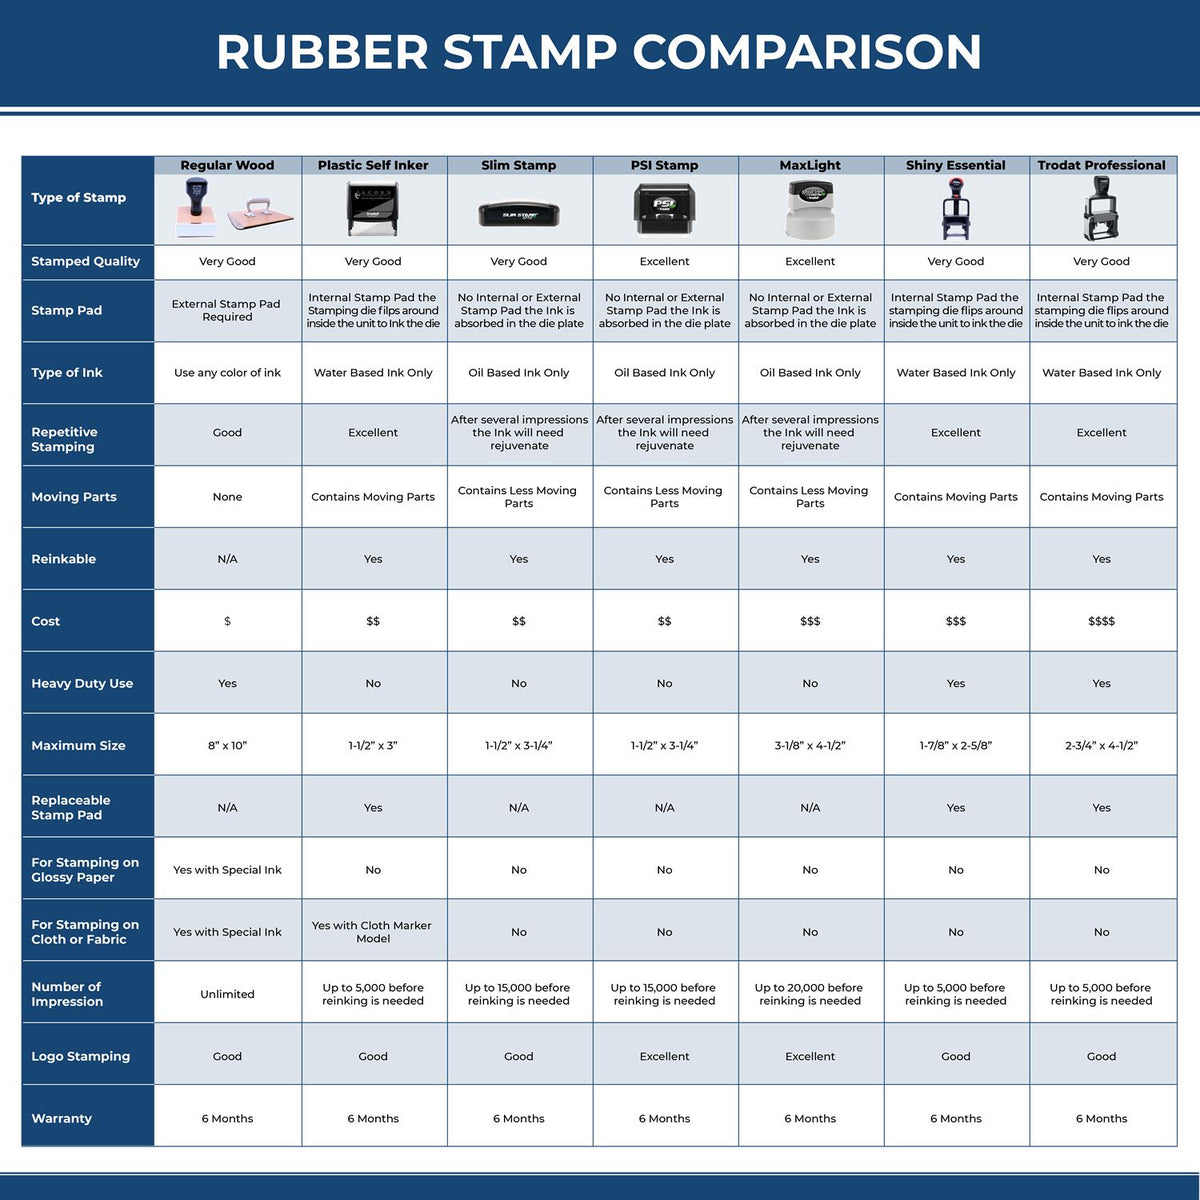 Large Spoiled Rubber Stamp 5594R Rubber Stamp Comparison